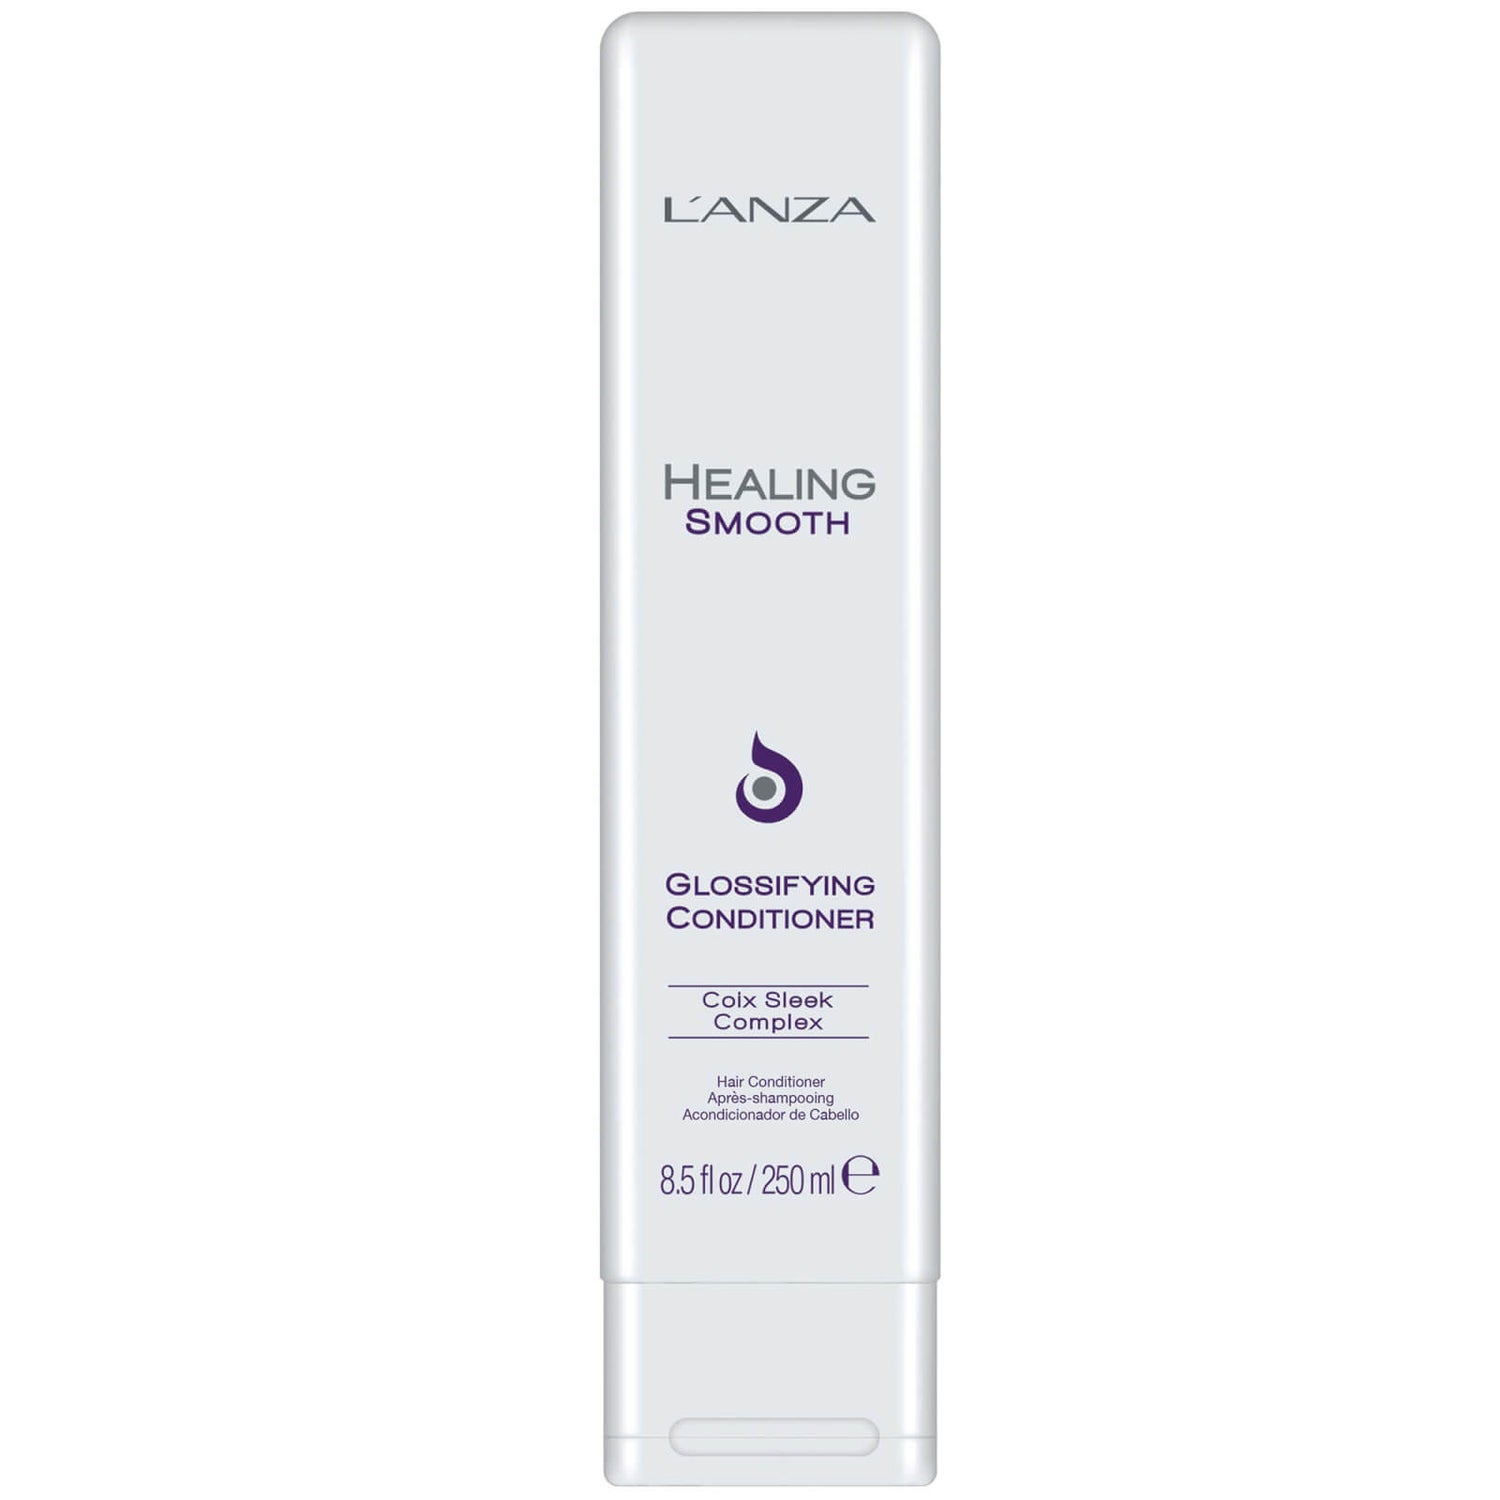 L'Anza Healing Smooth Glossifying Conditioner (250ml)